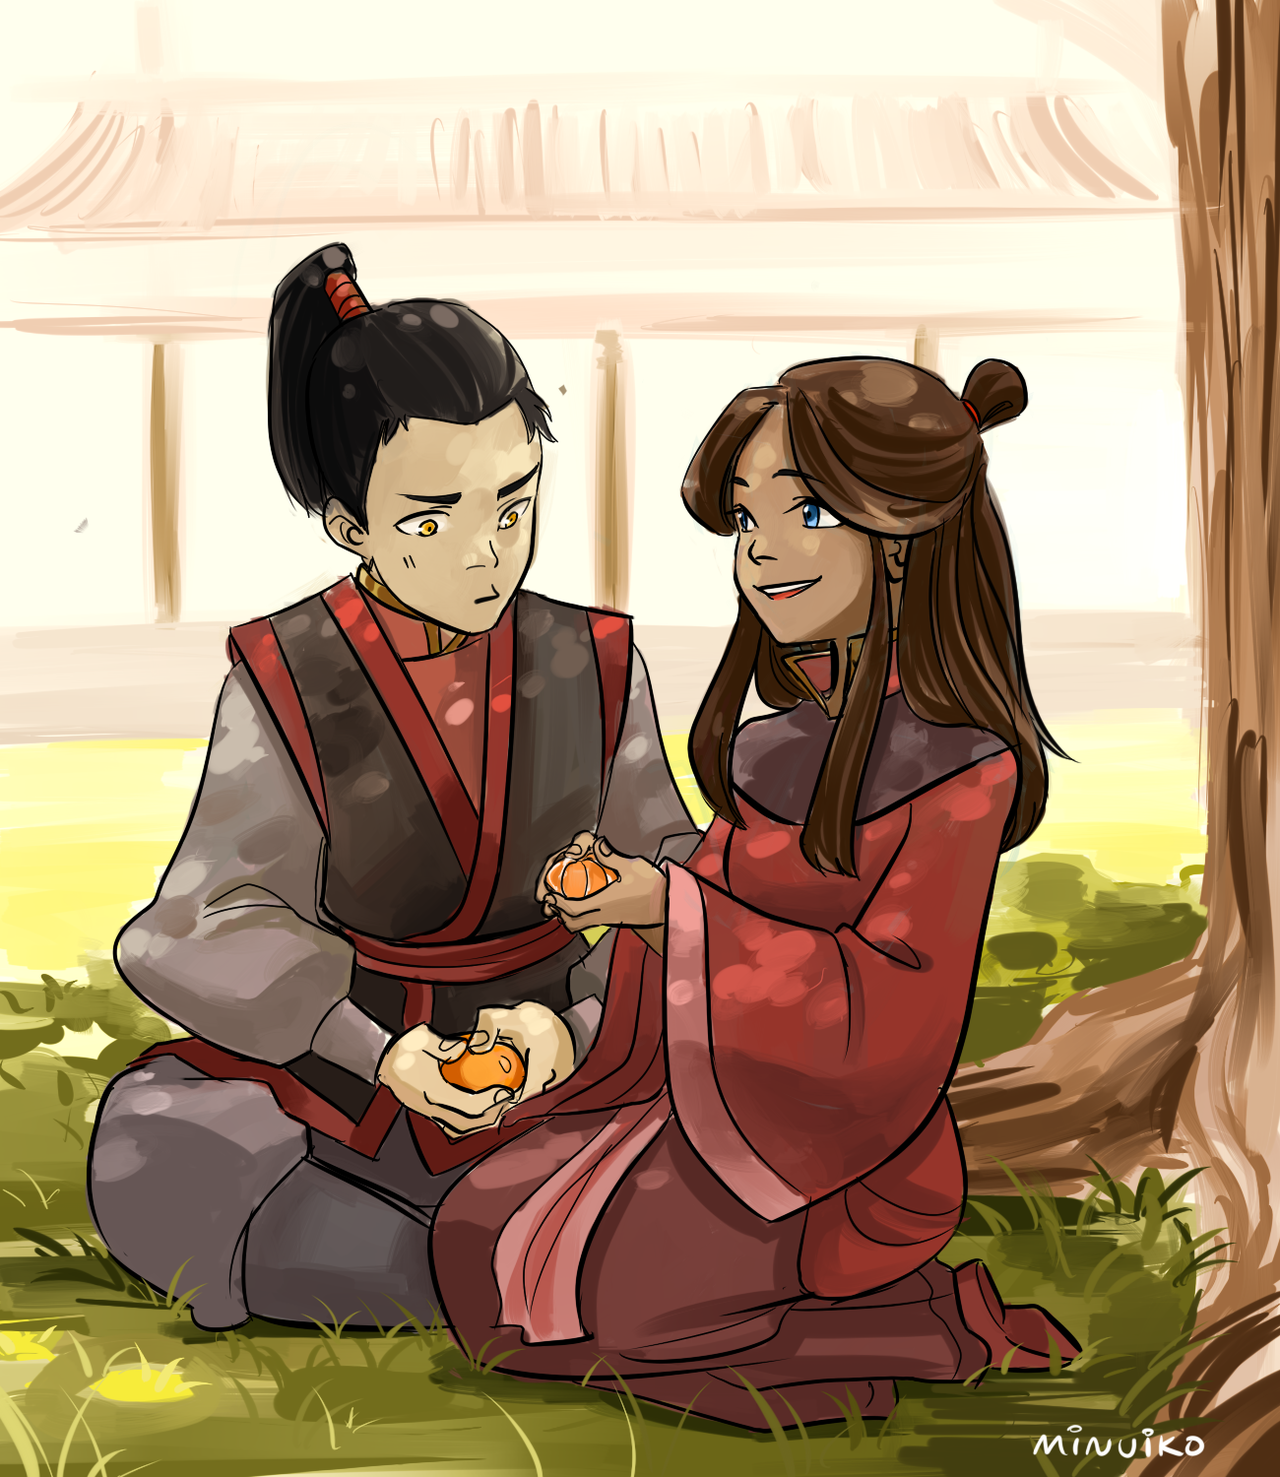 Minuiko: “Katara is captured in a fire nation raid and raised under Iroh (and becomes childhood friends with Zuko).” For Zutara